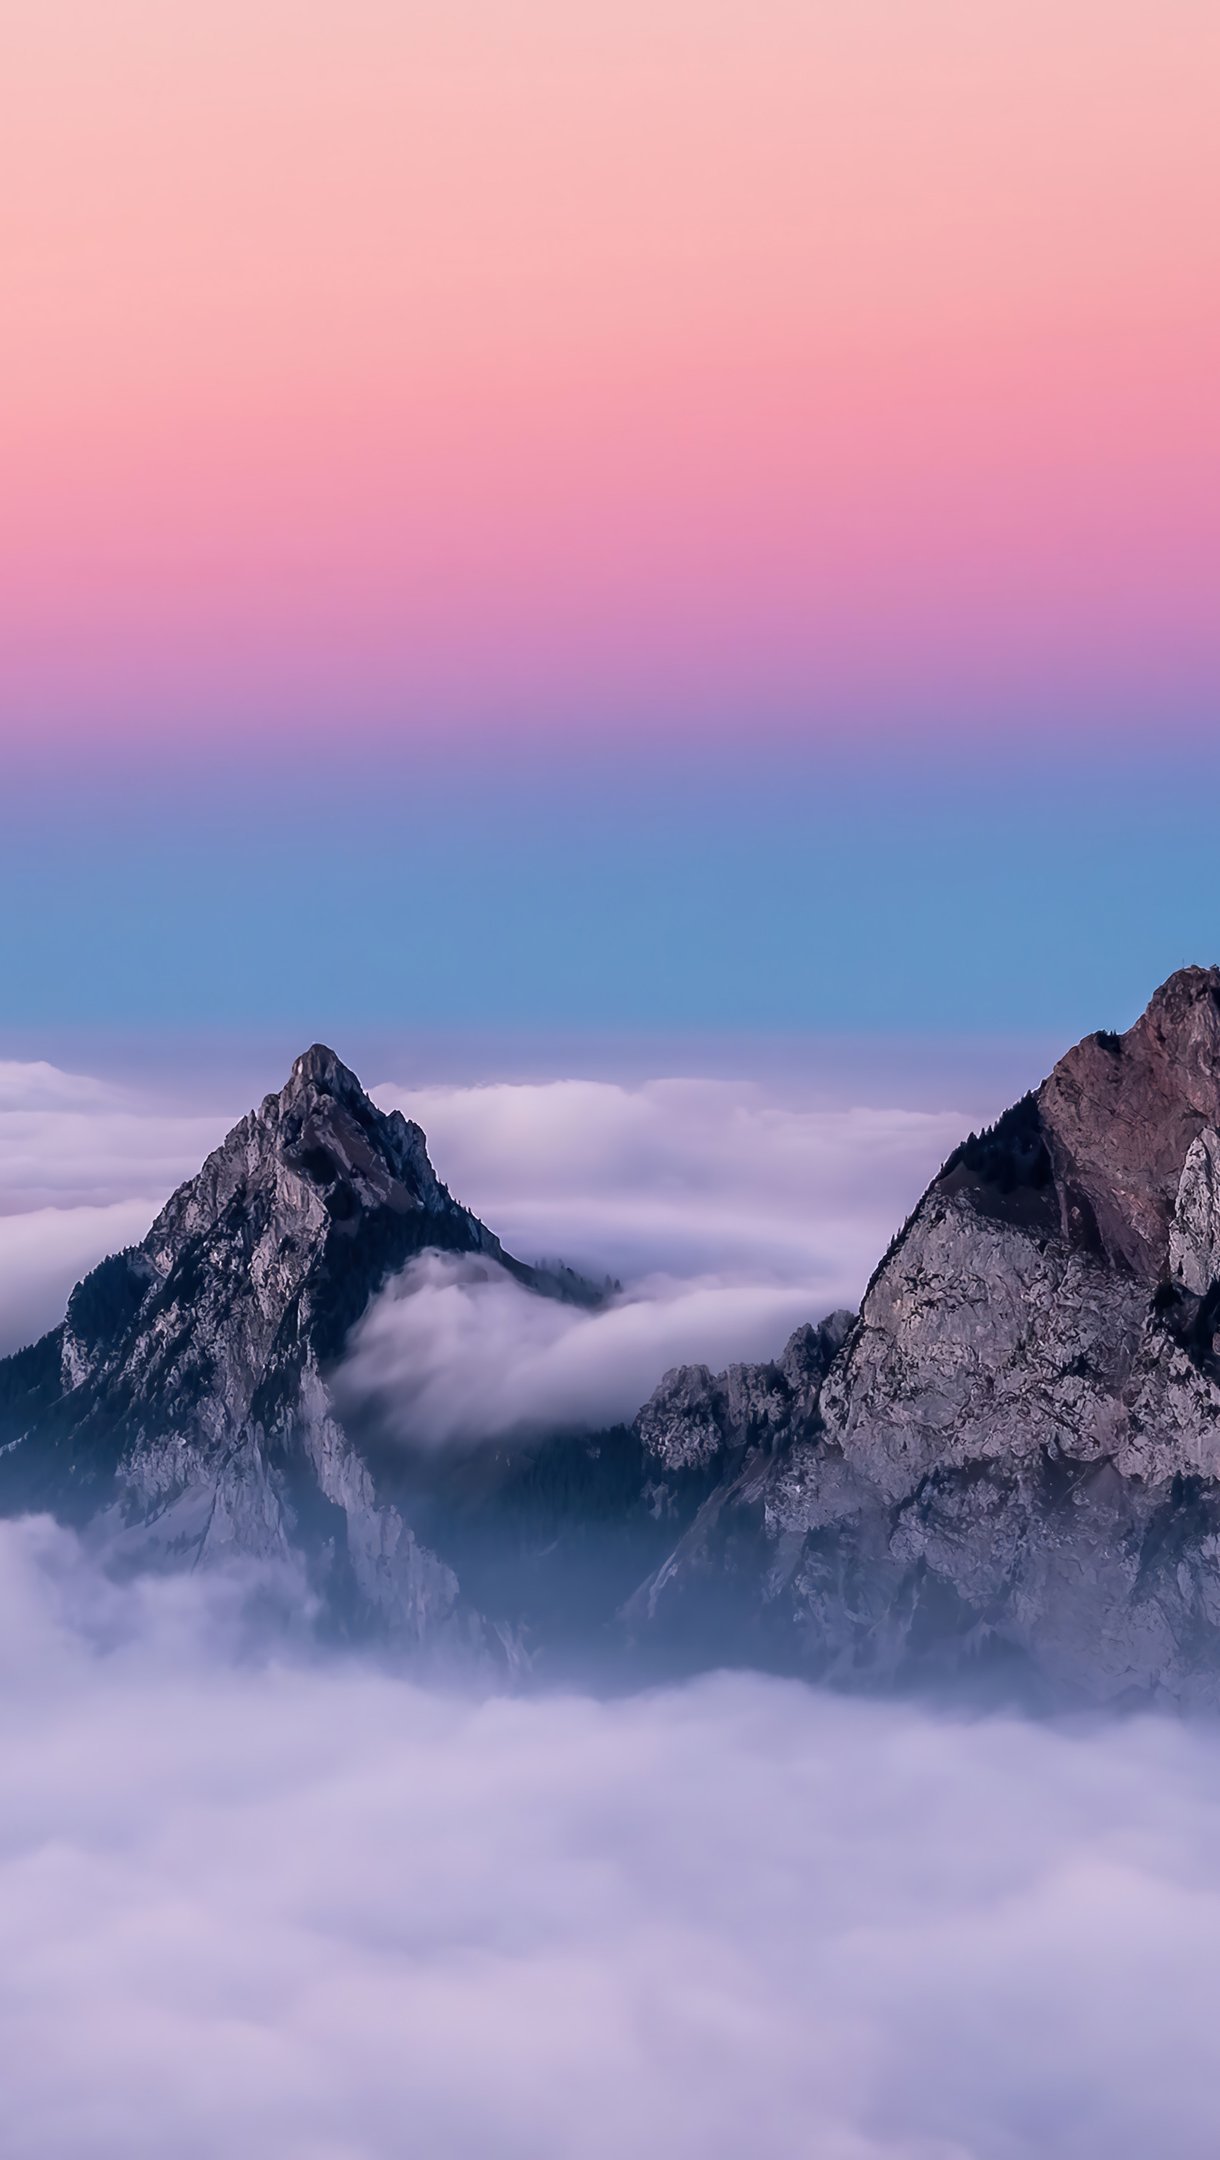 Mountains covered in clouds Wallpaper 4k Ultra HD ID:10943